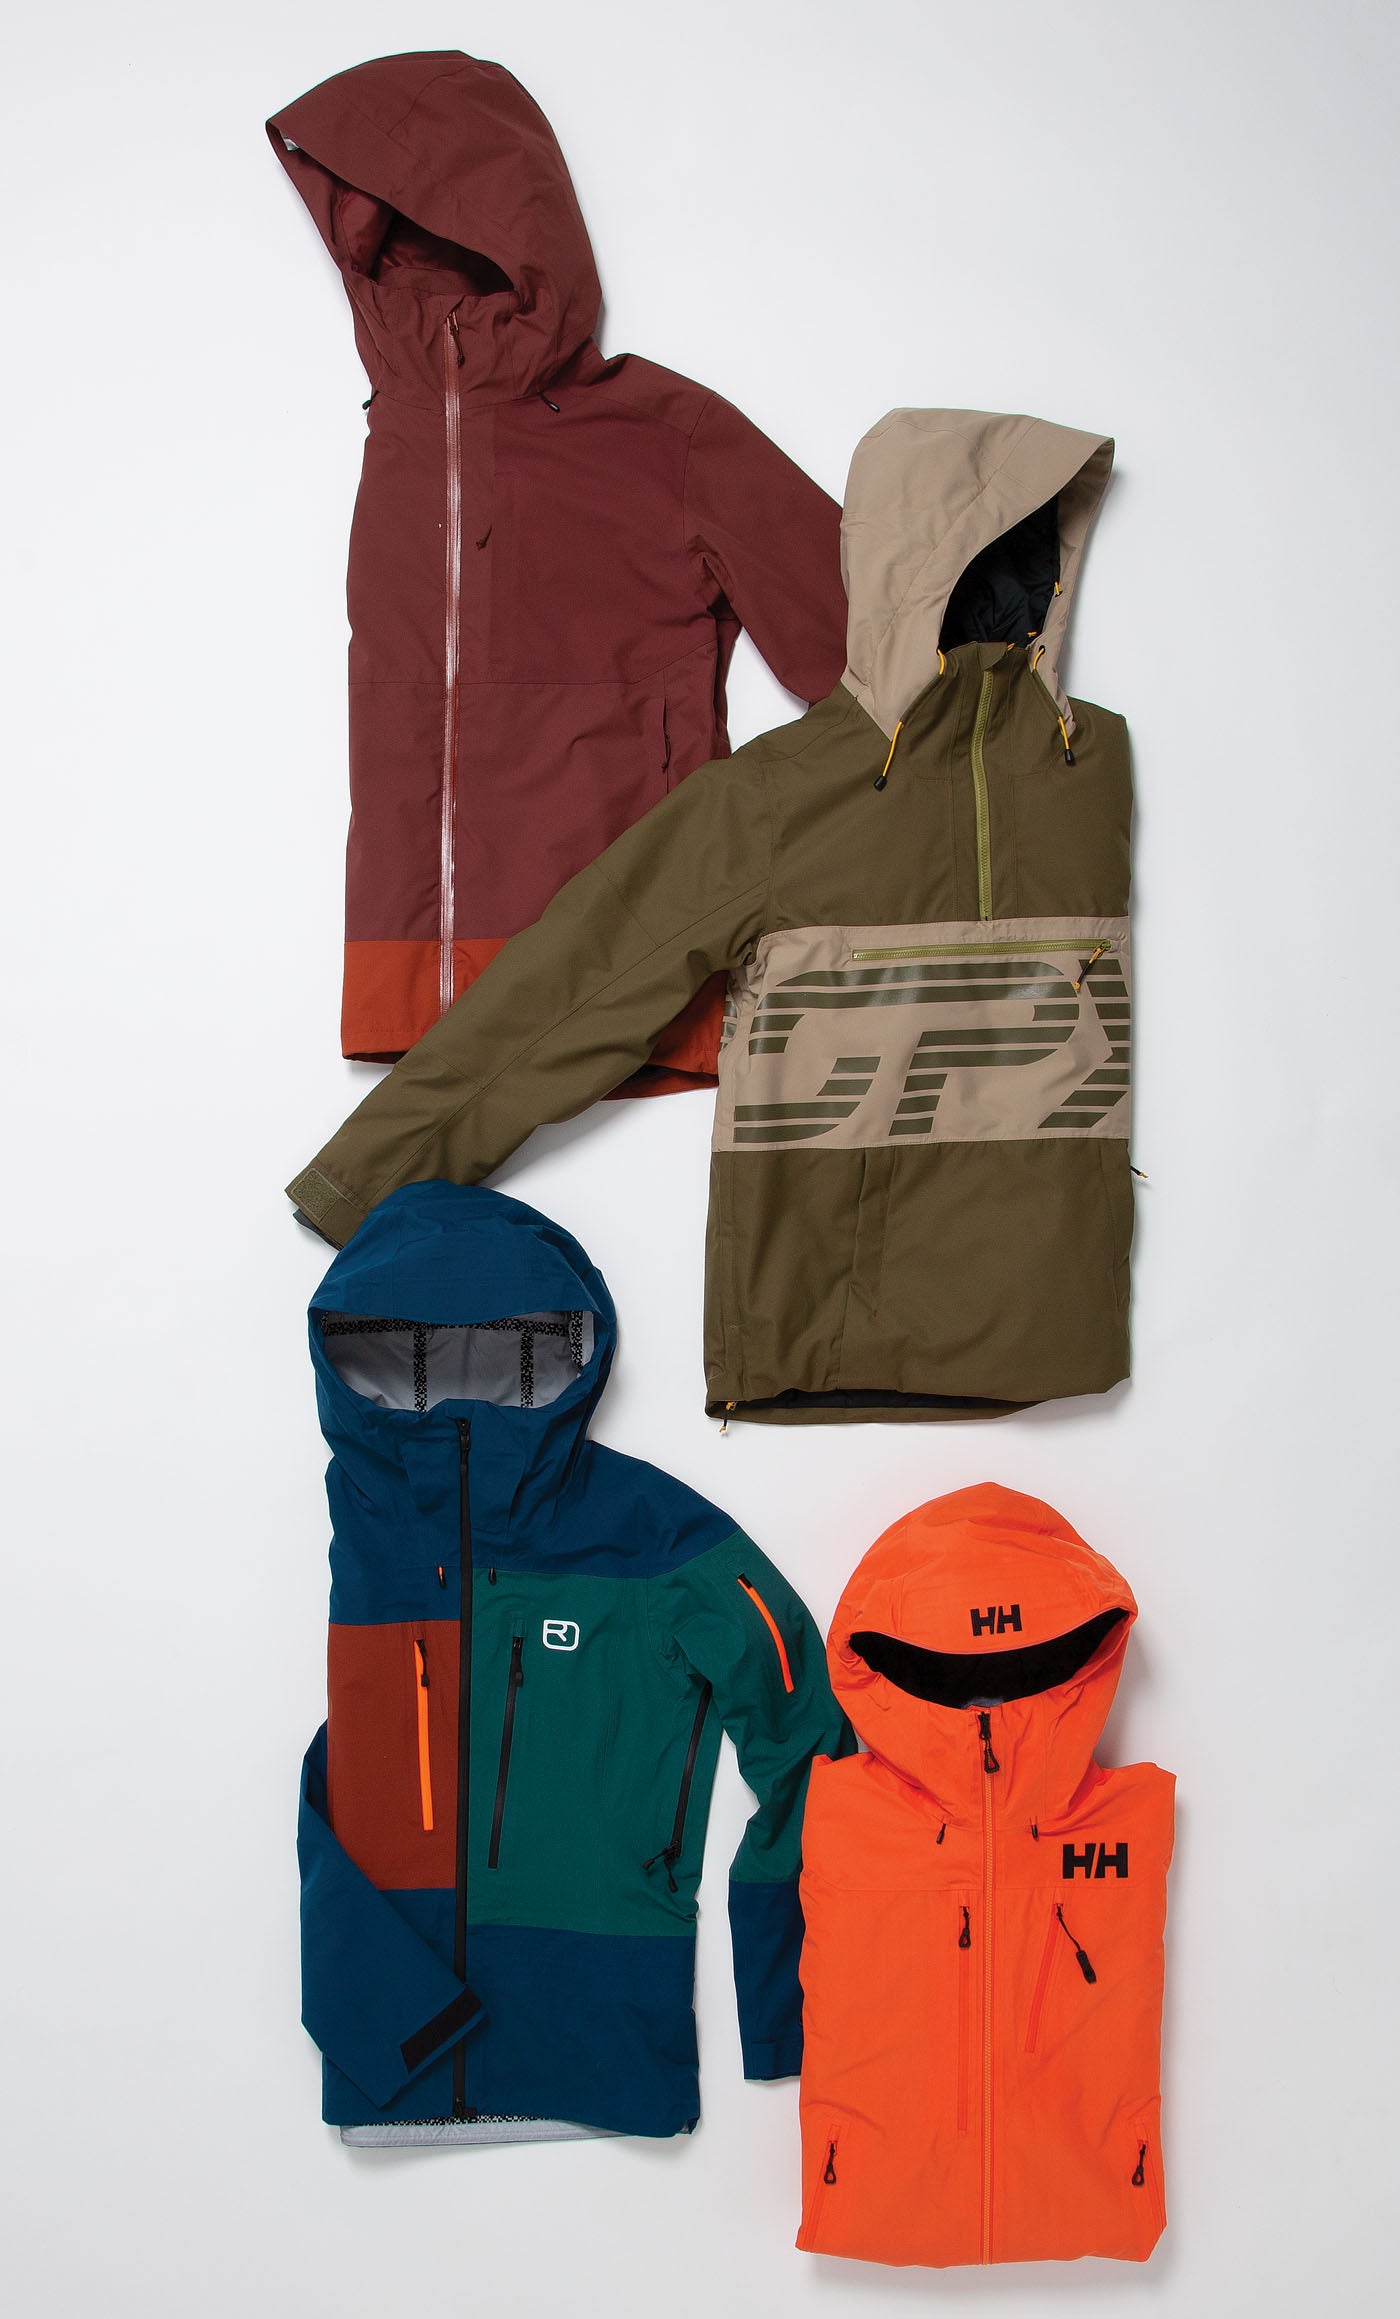 Best Snowboard Outfits with Jacket Men's Outerwear Ideas 2022